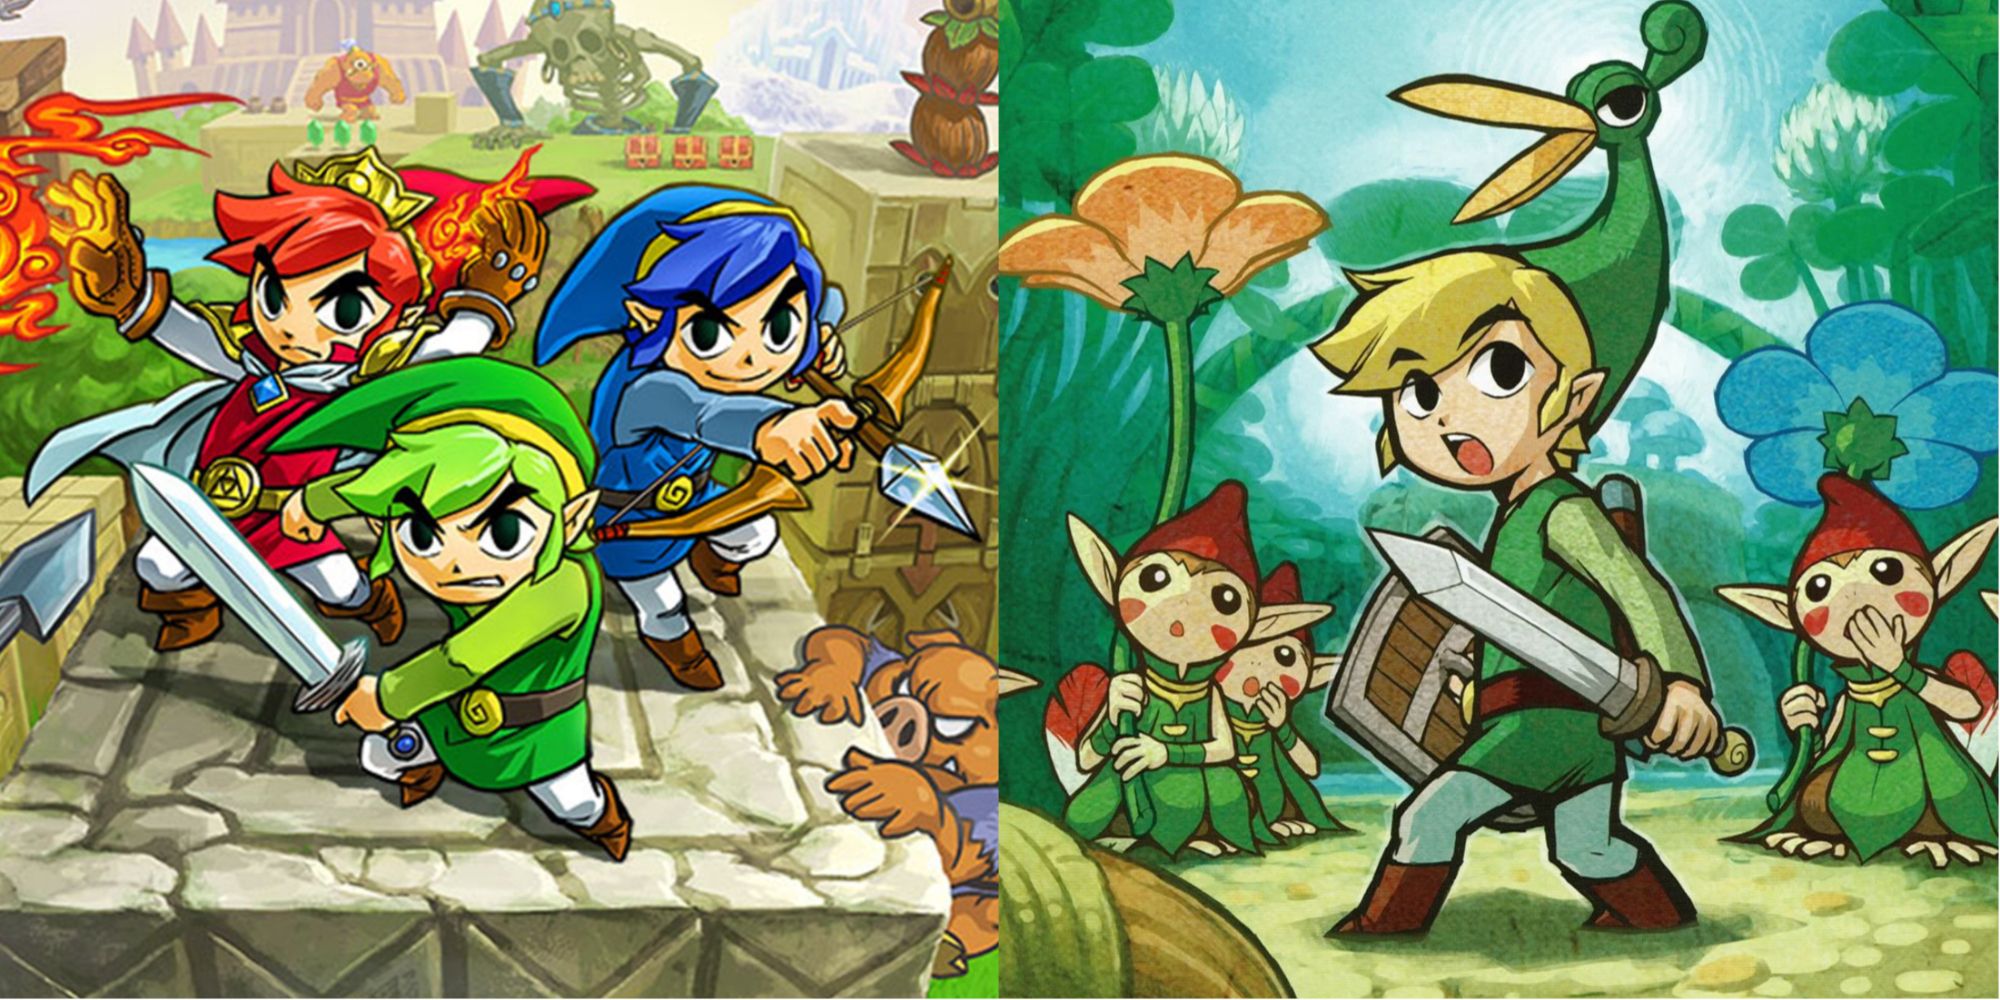 Classic Legend of Zelda Games Perfect For New Players